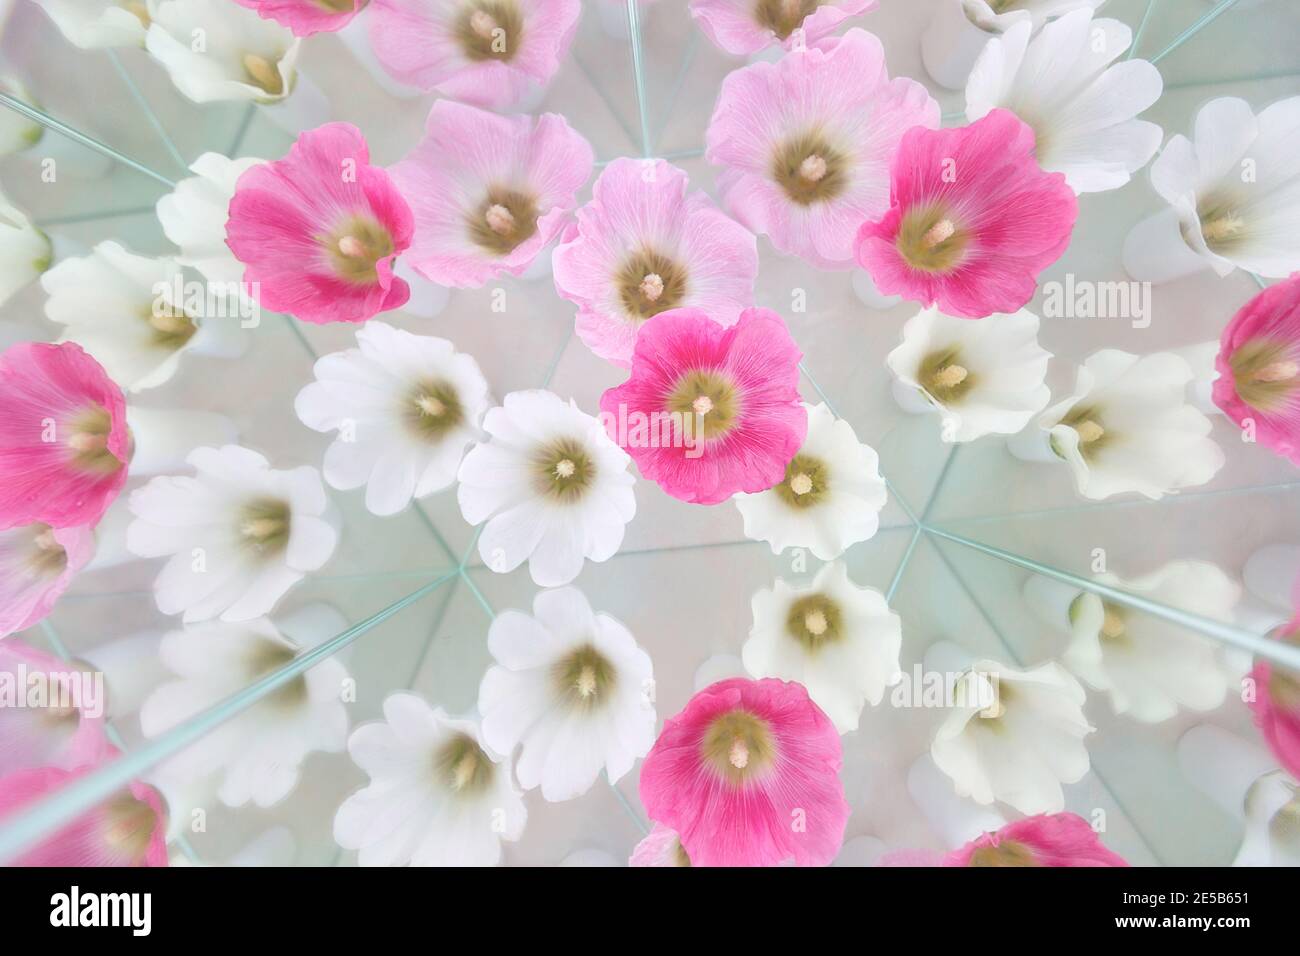 Floral background with althaea malva. Aesthetics light image with white and pink flowers. Gentle sophistication with geometrical mirror effect Stock Photo